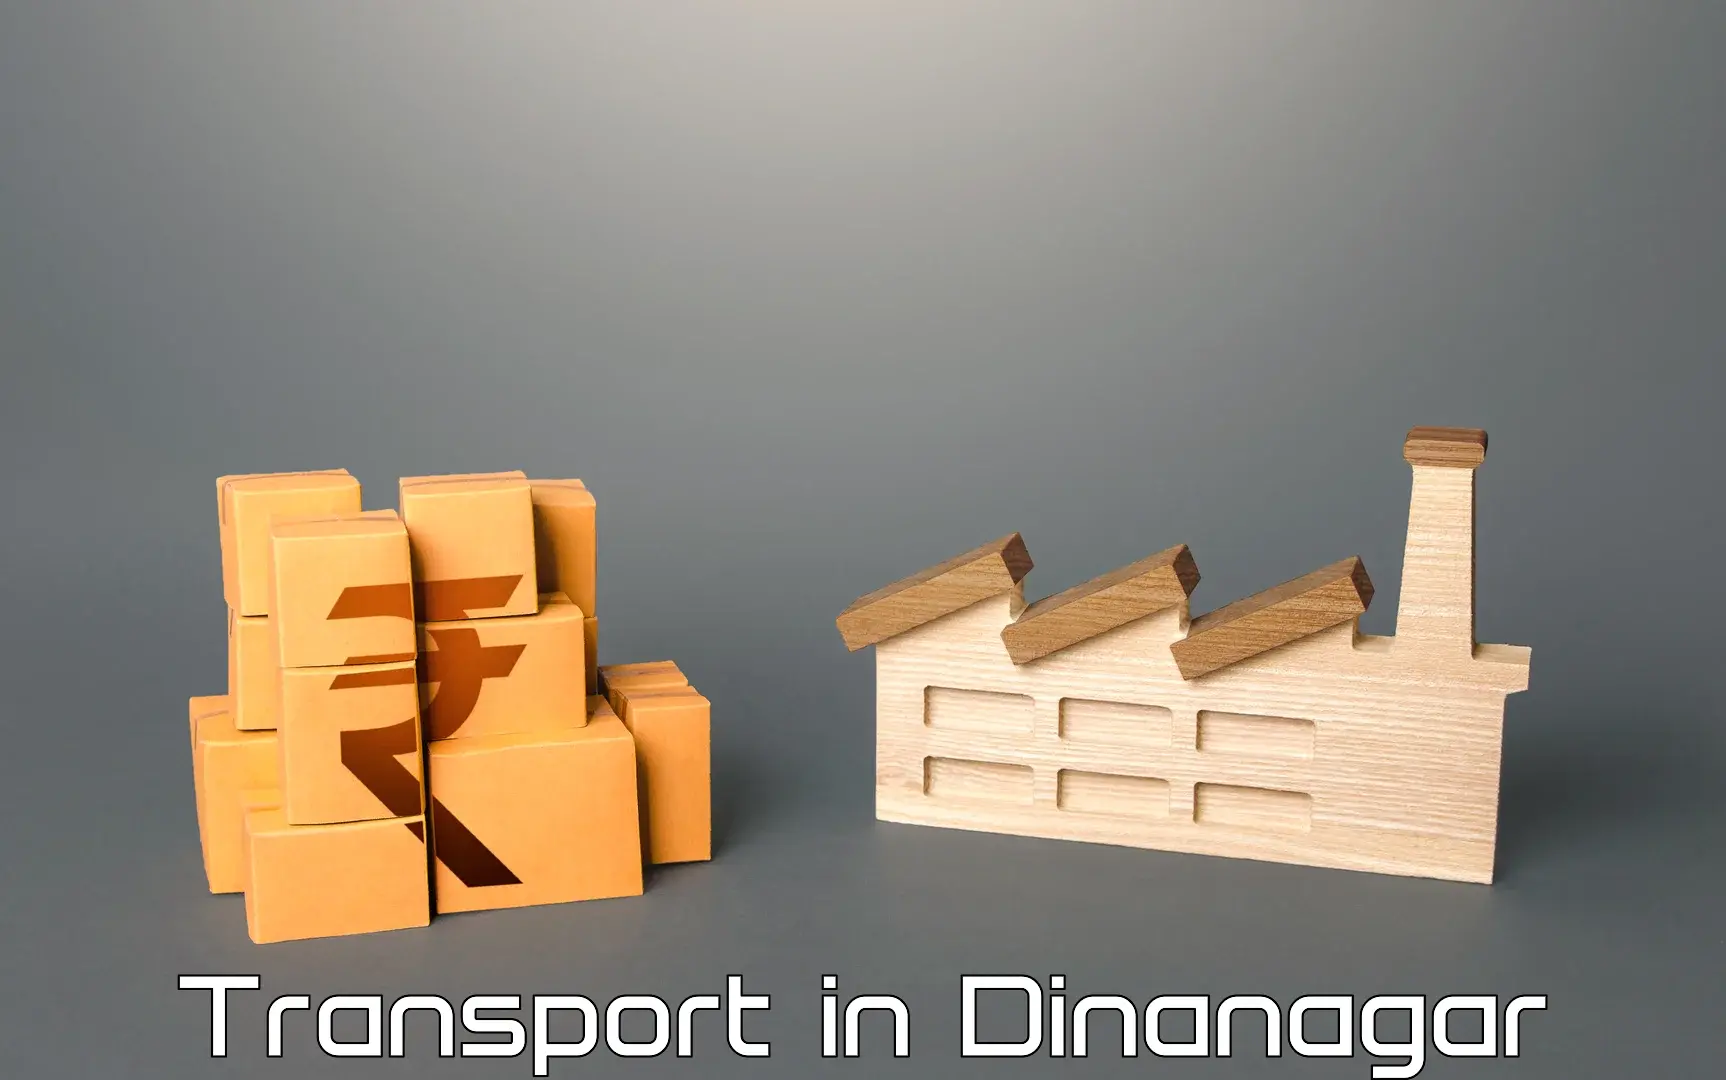 Transport bike from one state to another in Dinanagar